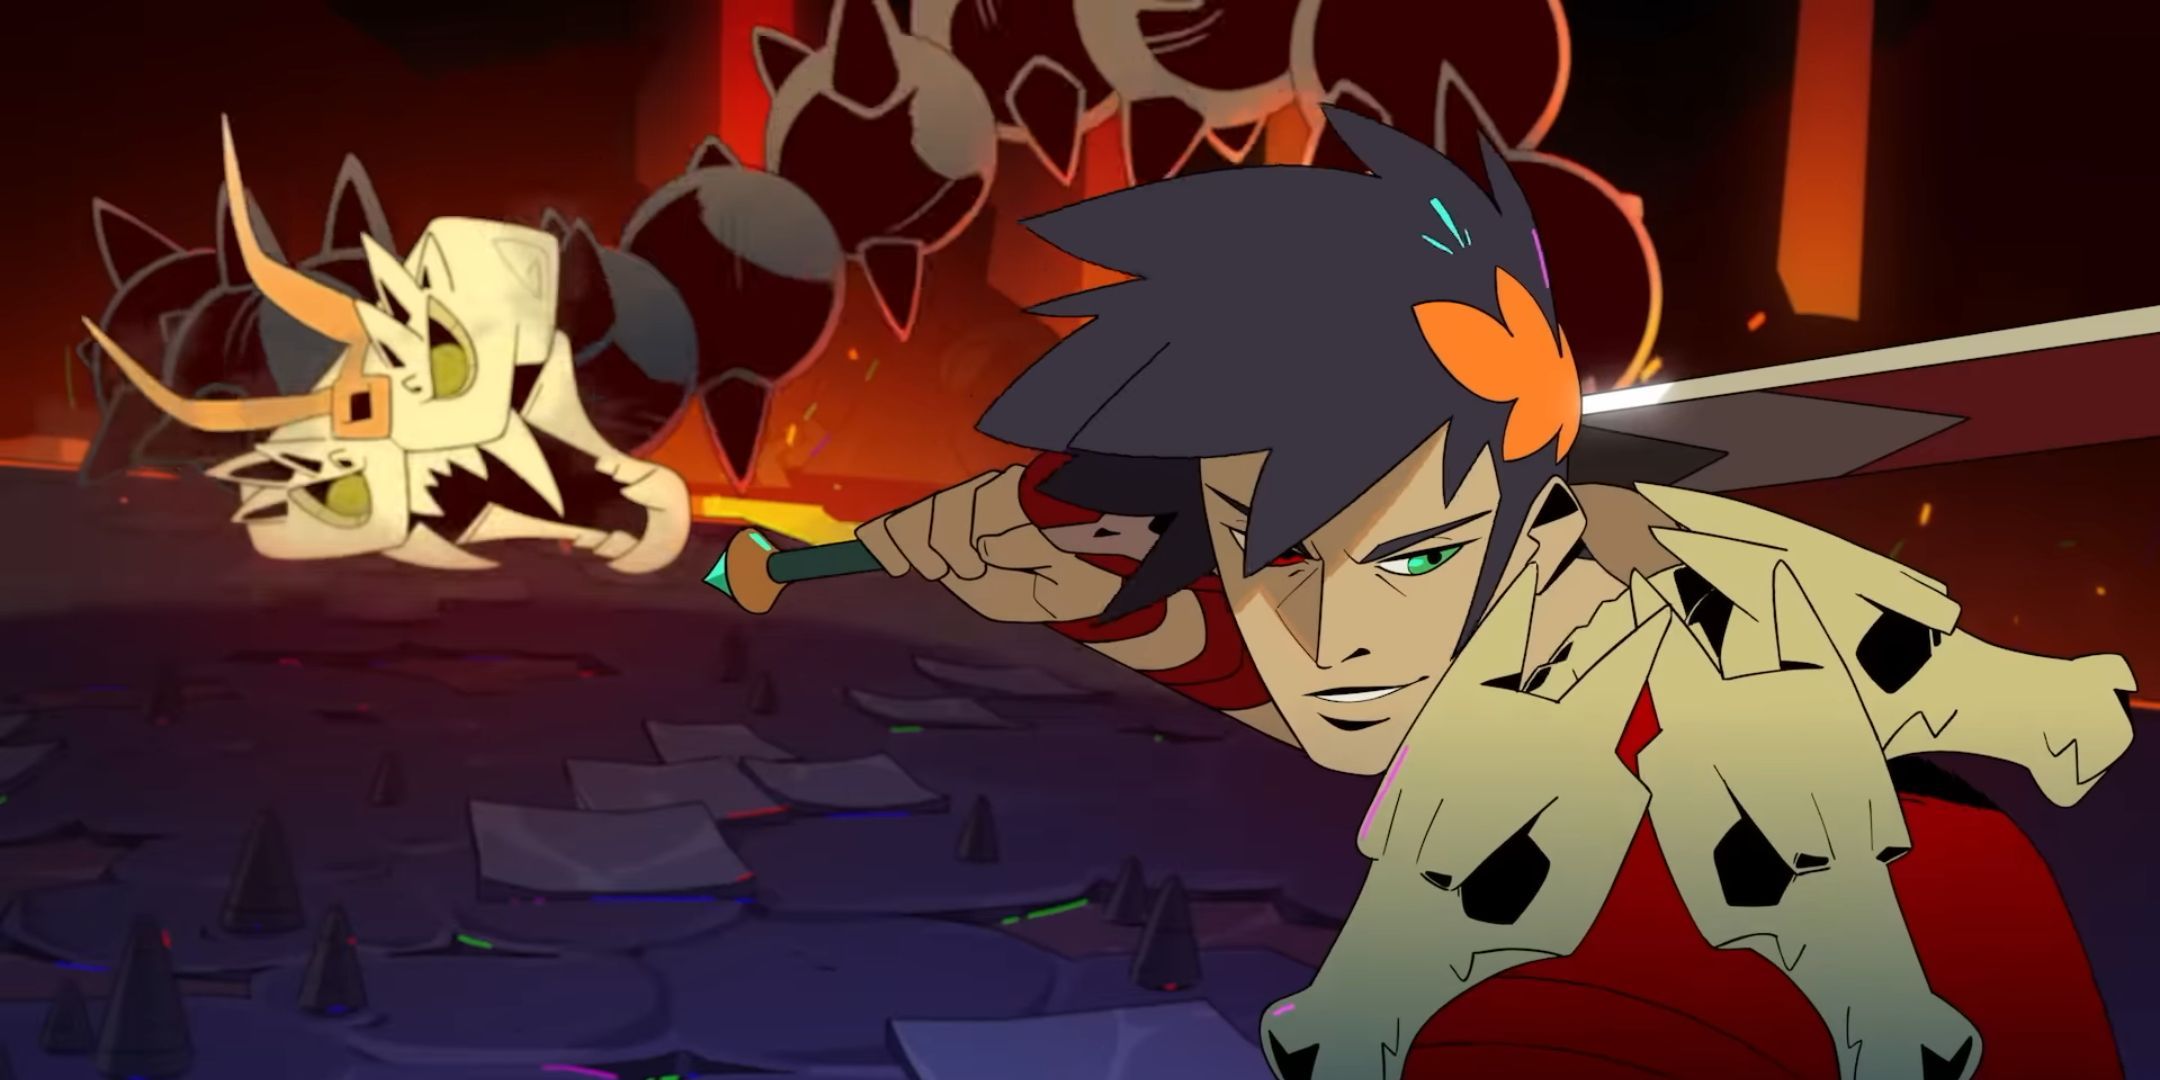 Zagreus in the launch trailer for Hades.